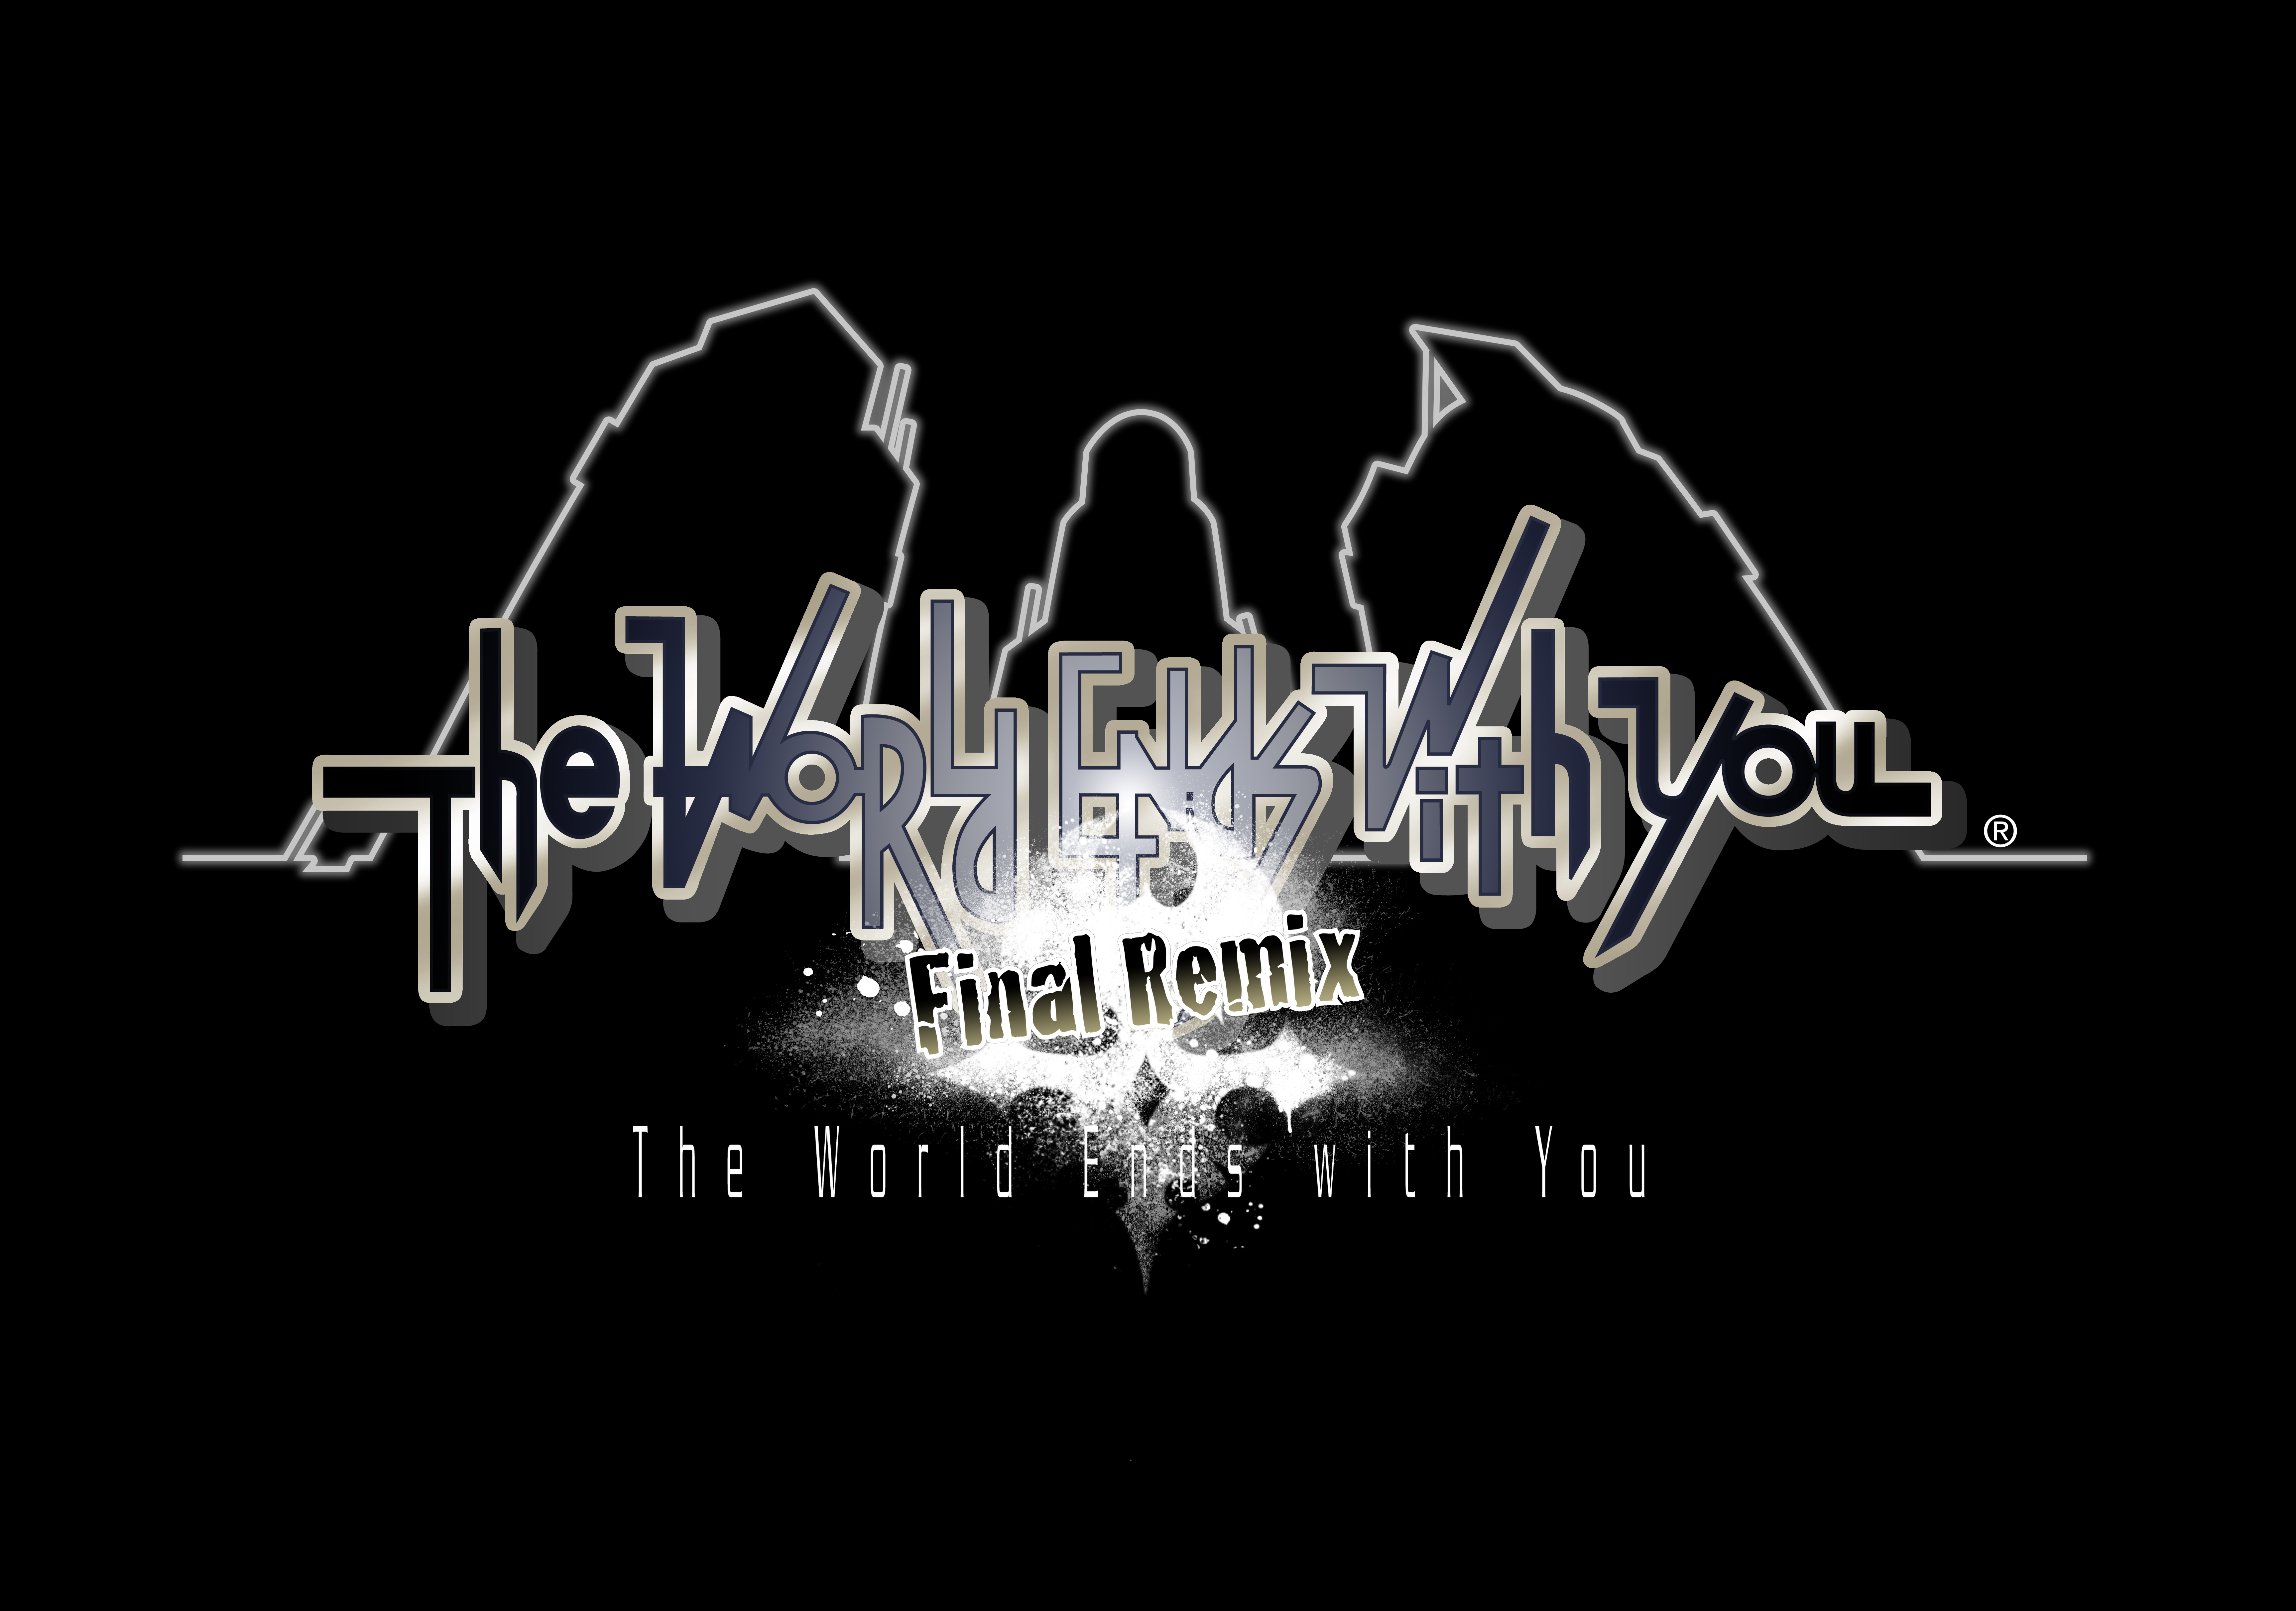 The World Ends With You: Final Remix.